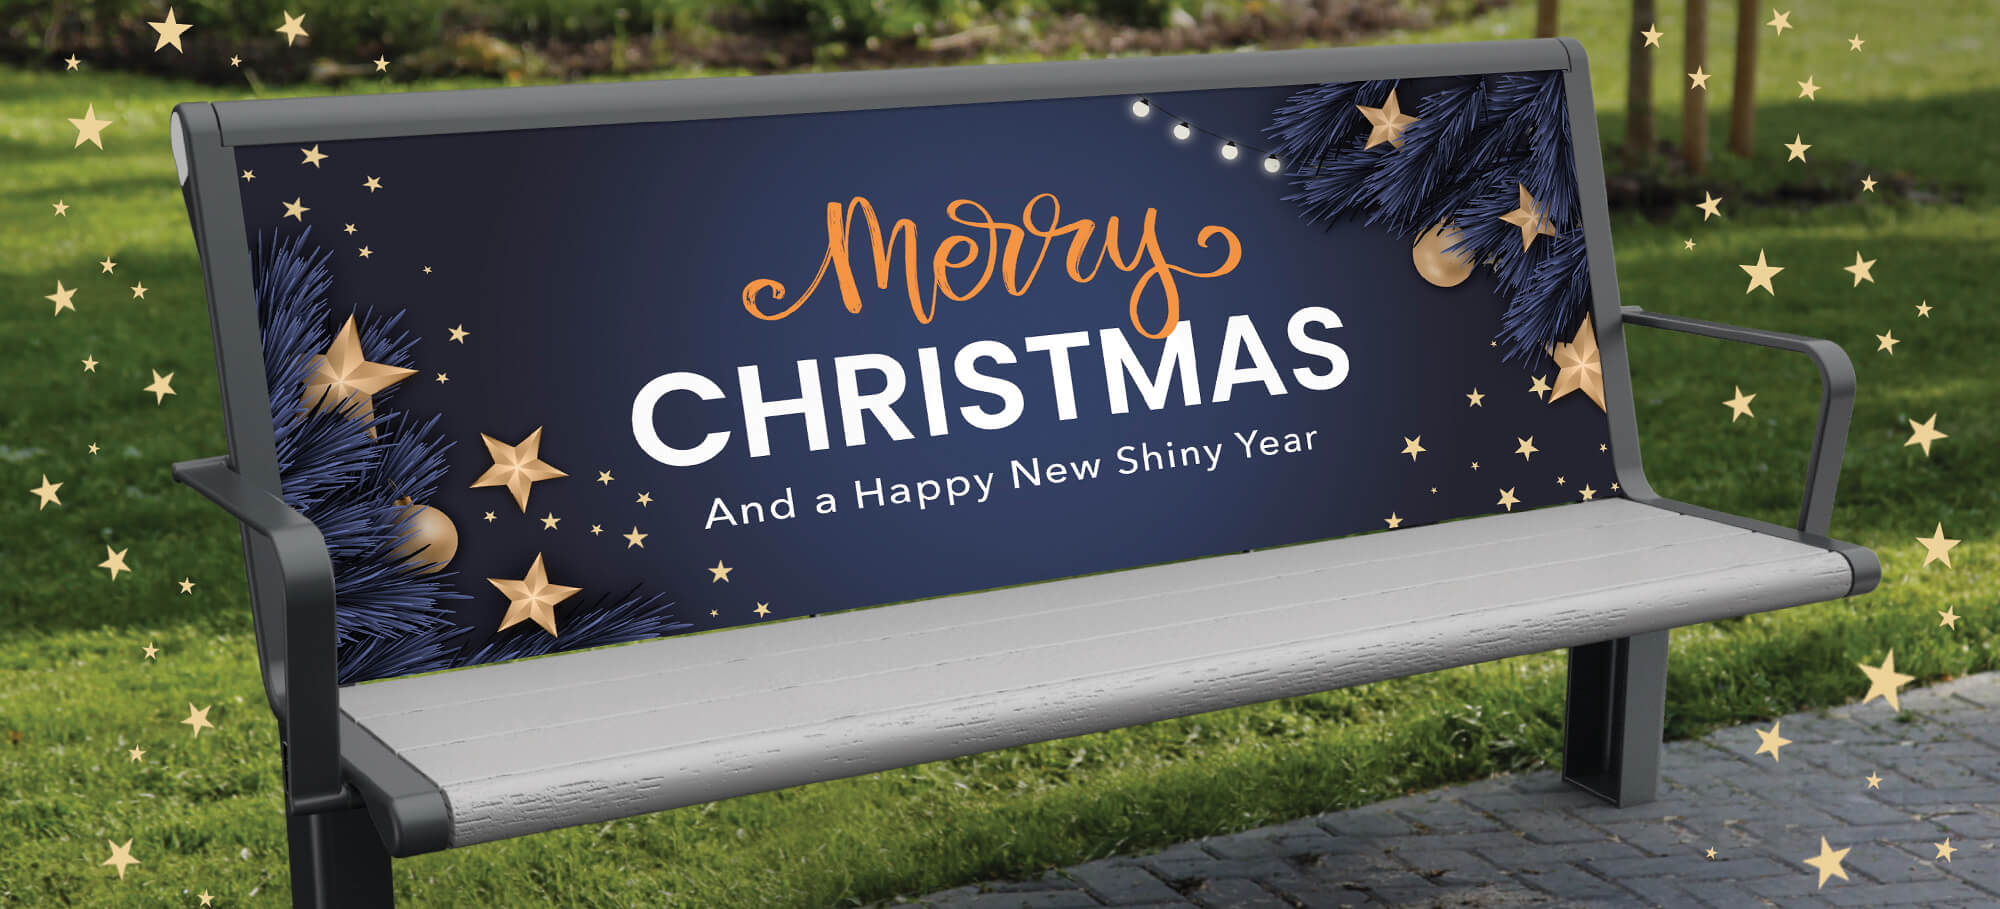 Bench seat with a Merry Christmas message on it